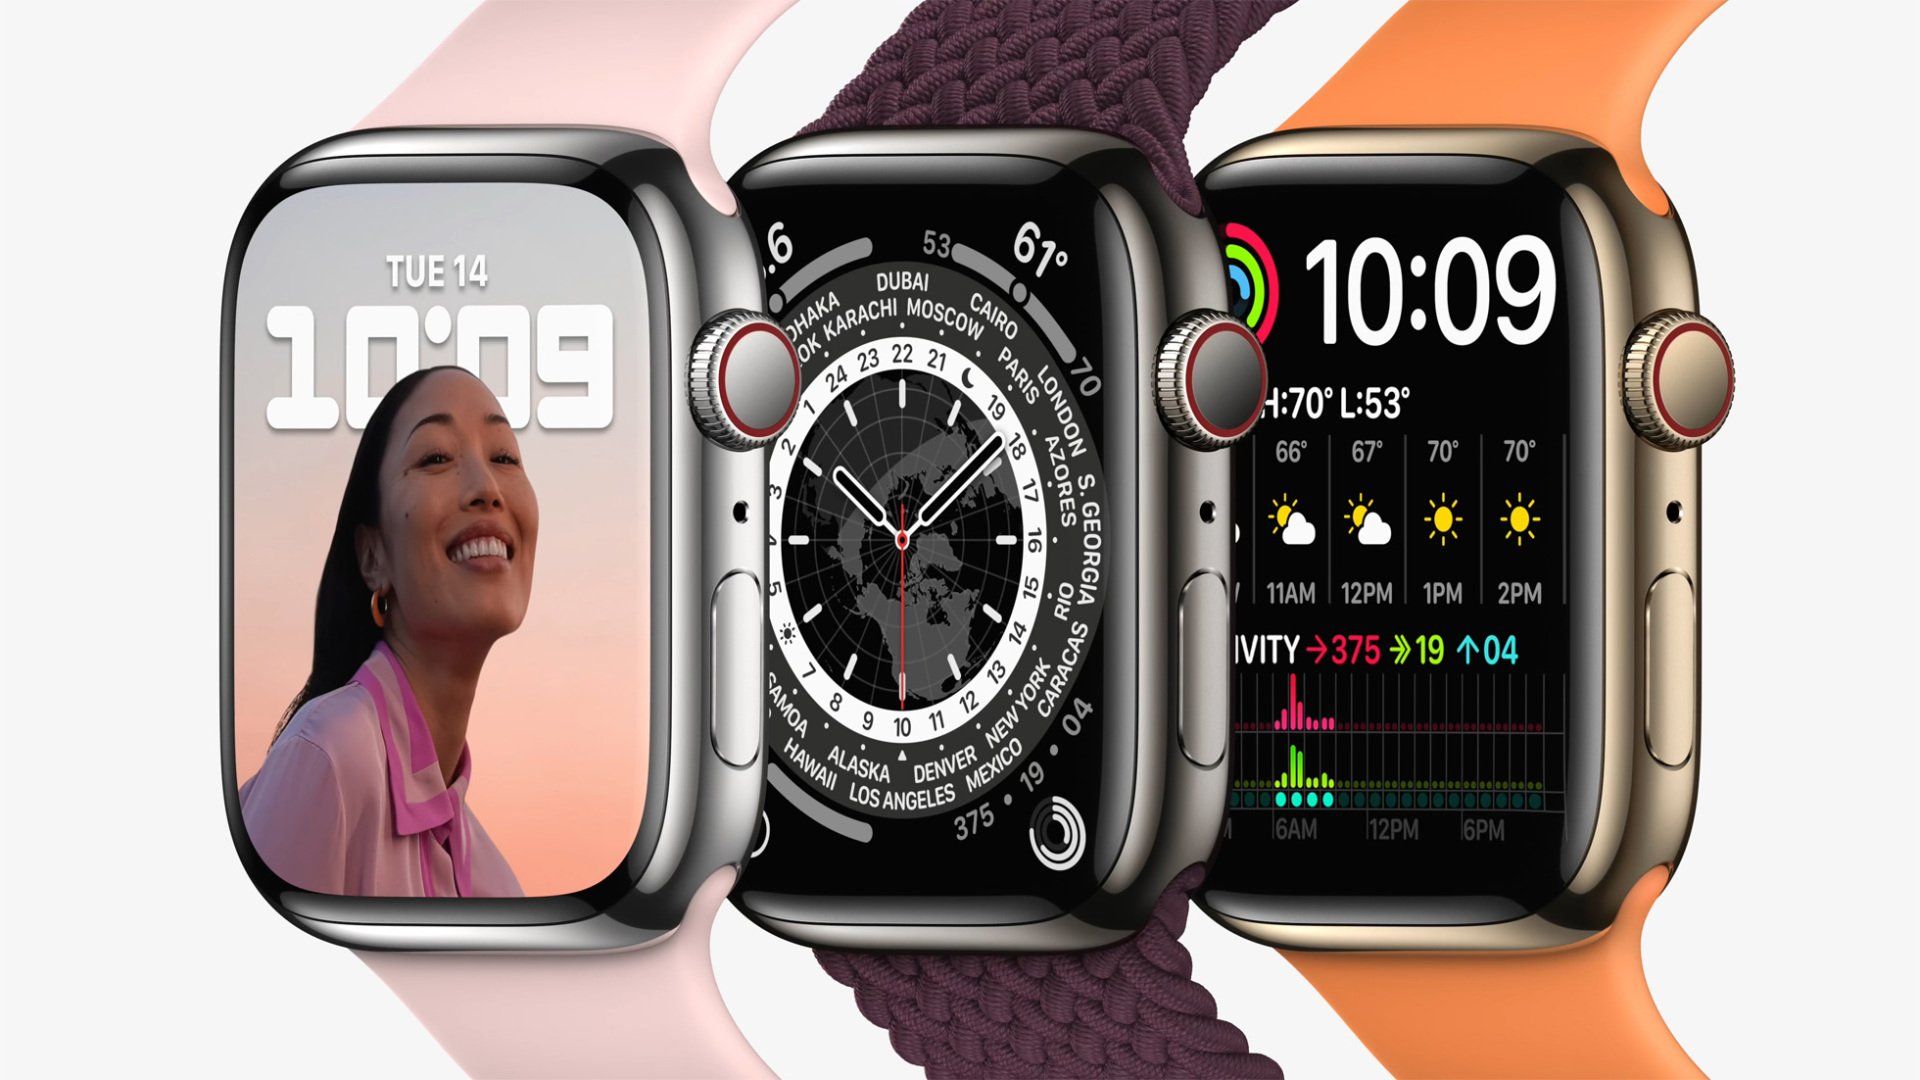 How to View the SIM Card Number on an Apple Watch